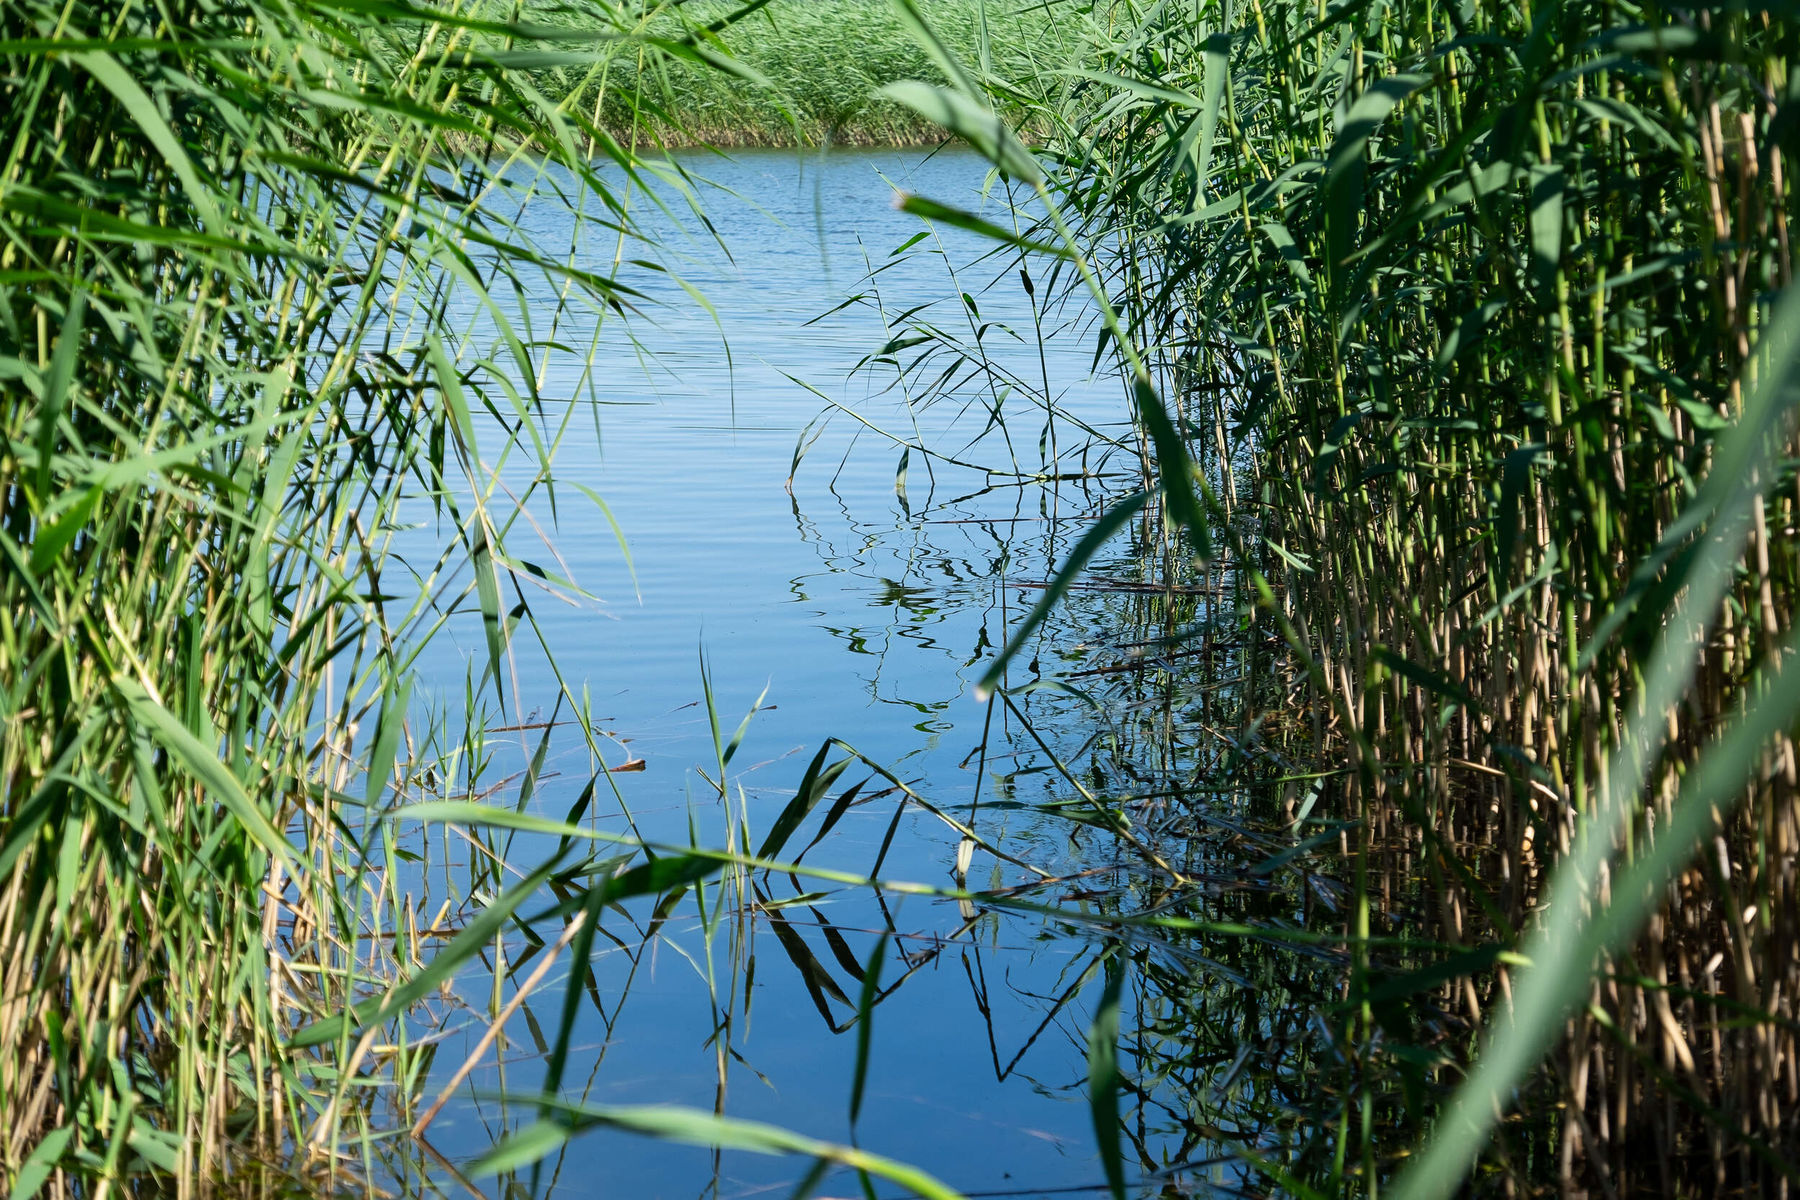 Lake surrounded by tall grass